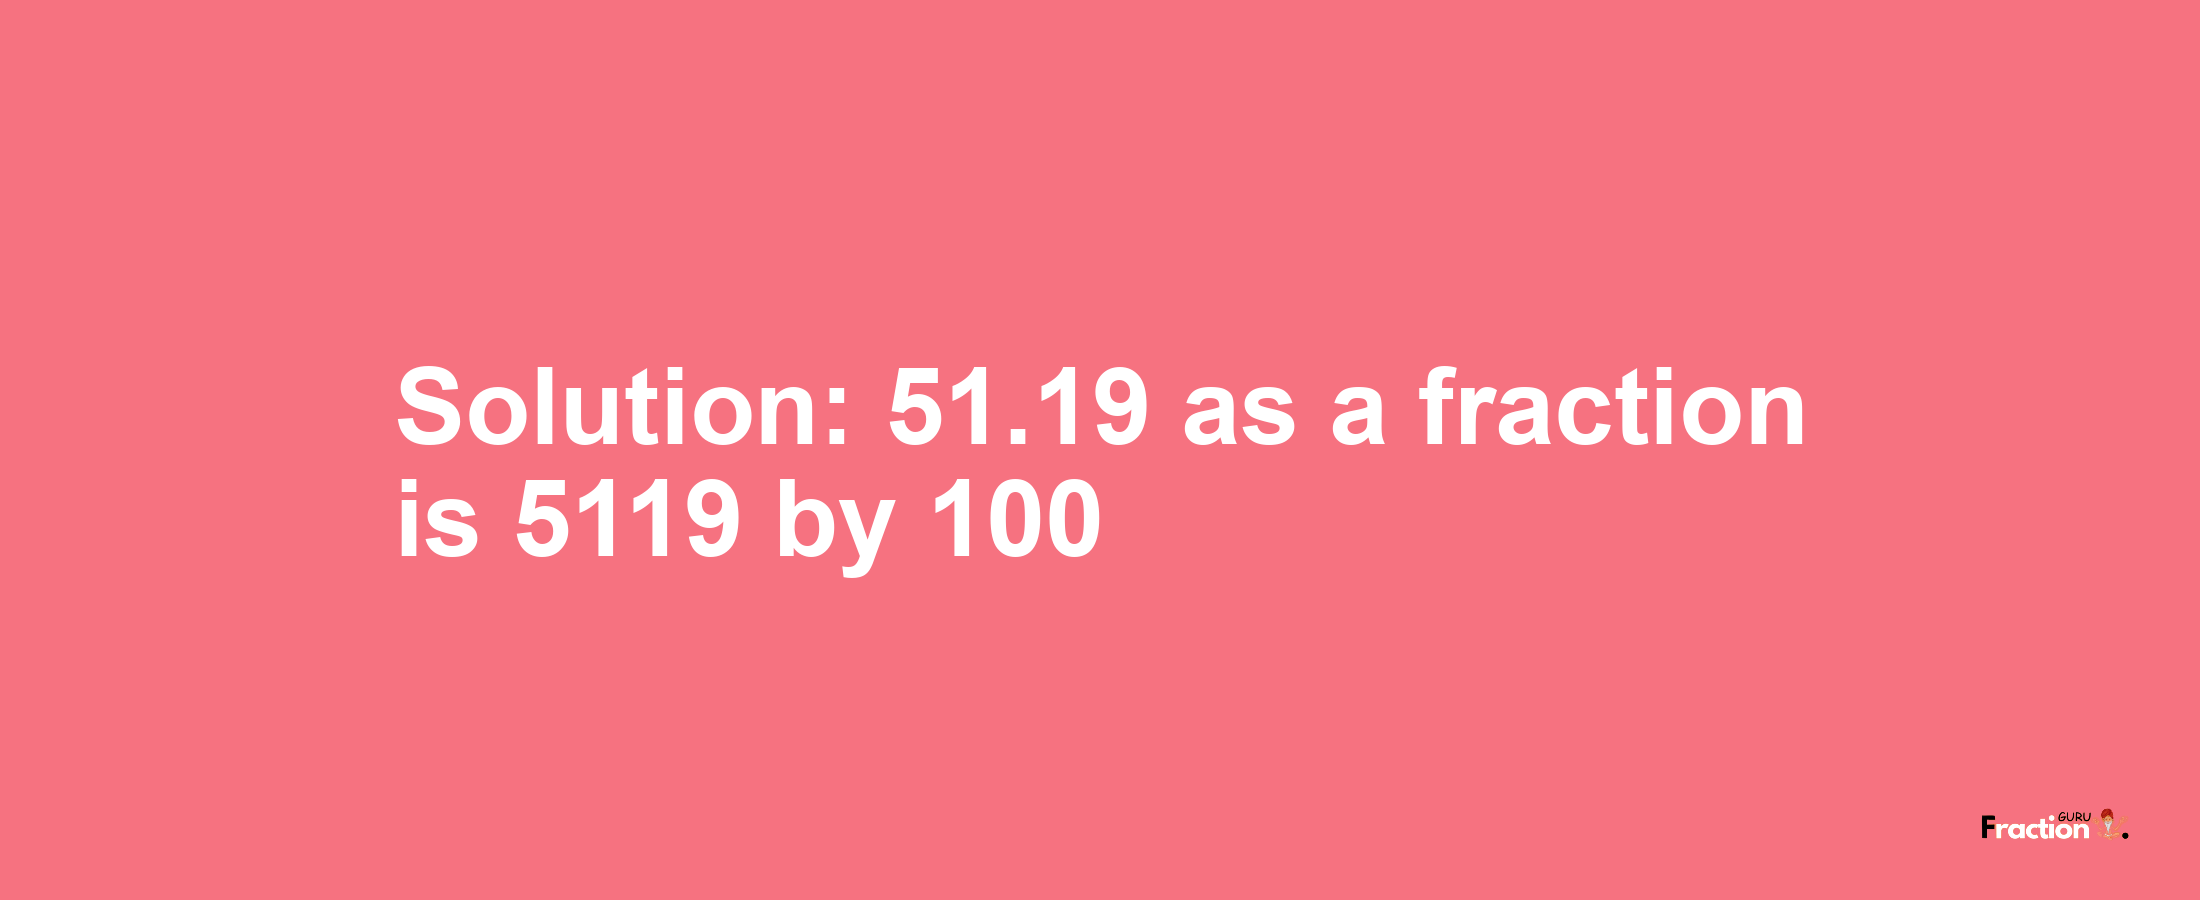 Solution:51.19 as a fraction is 5119/100